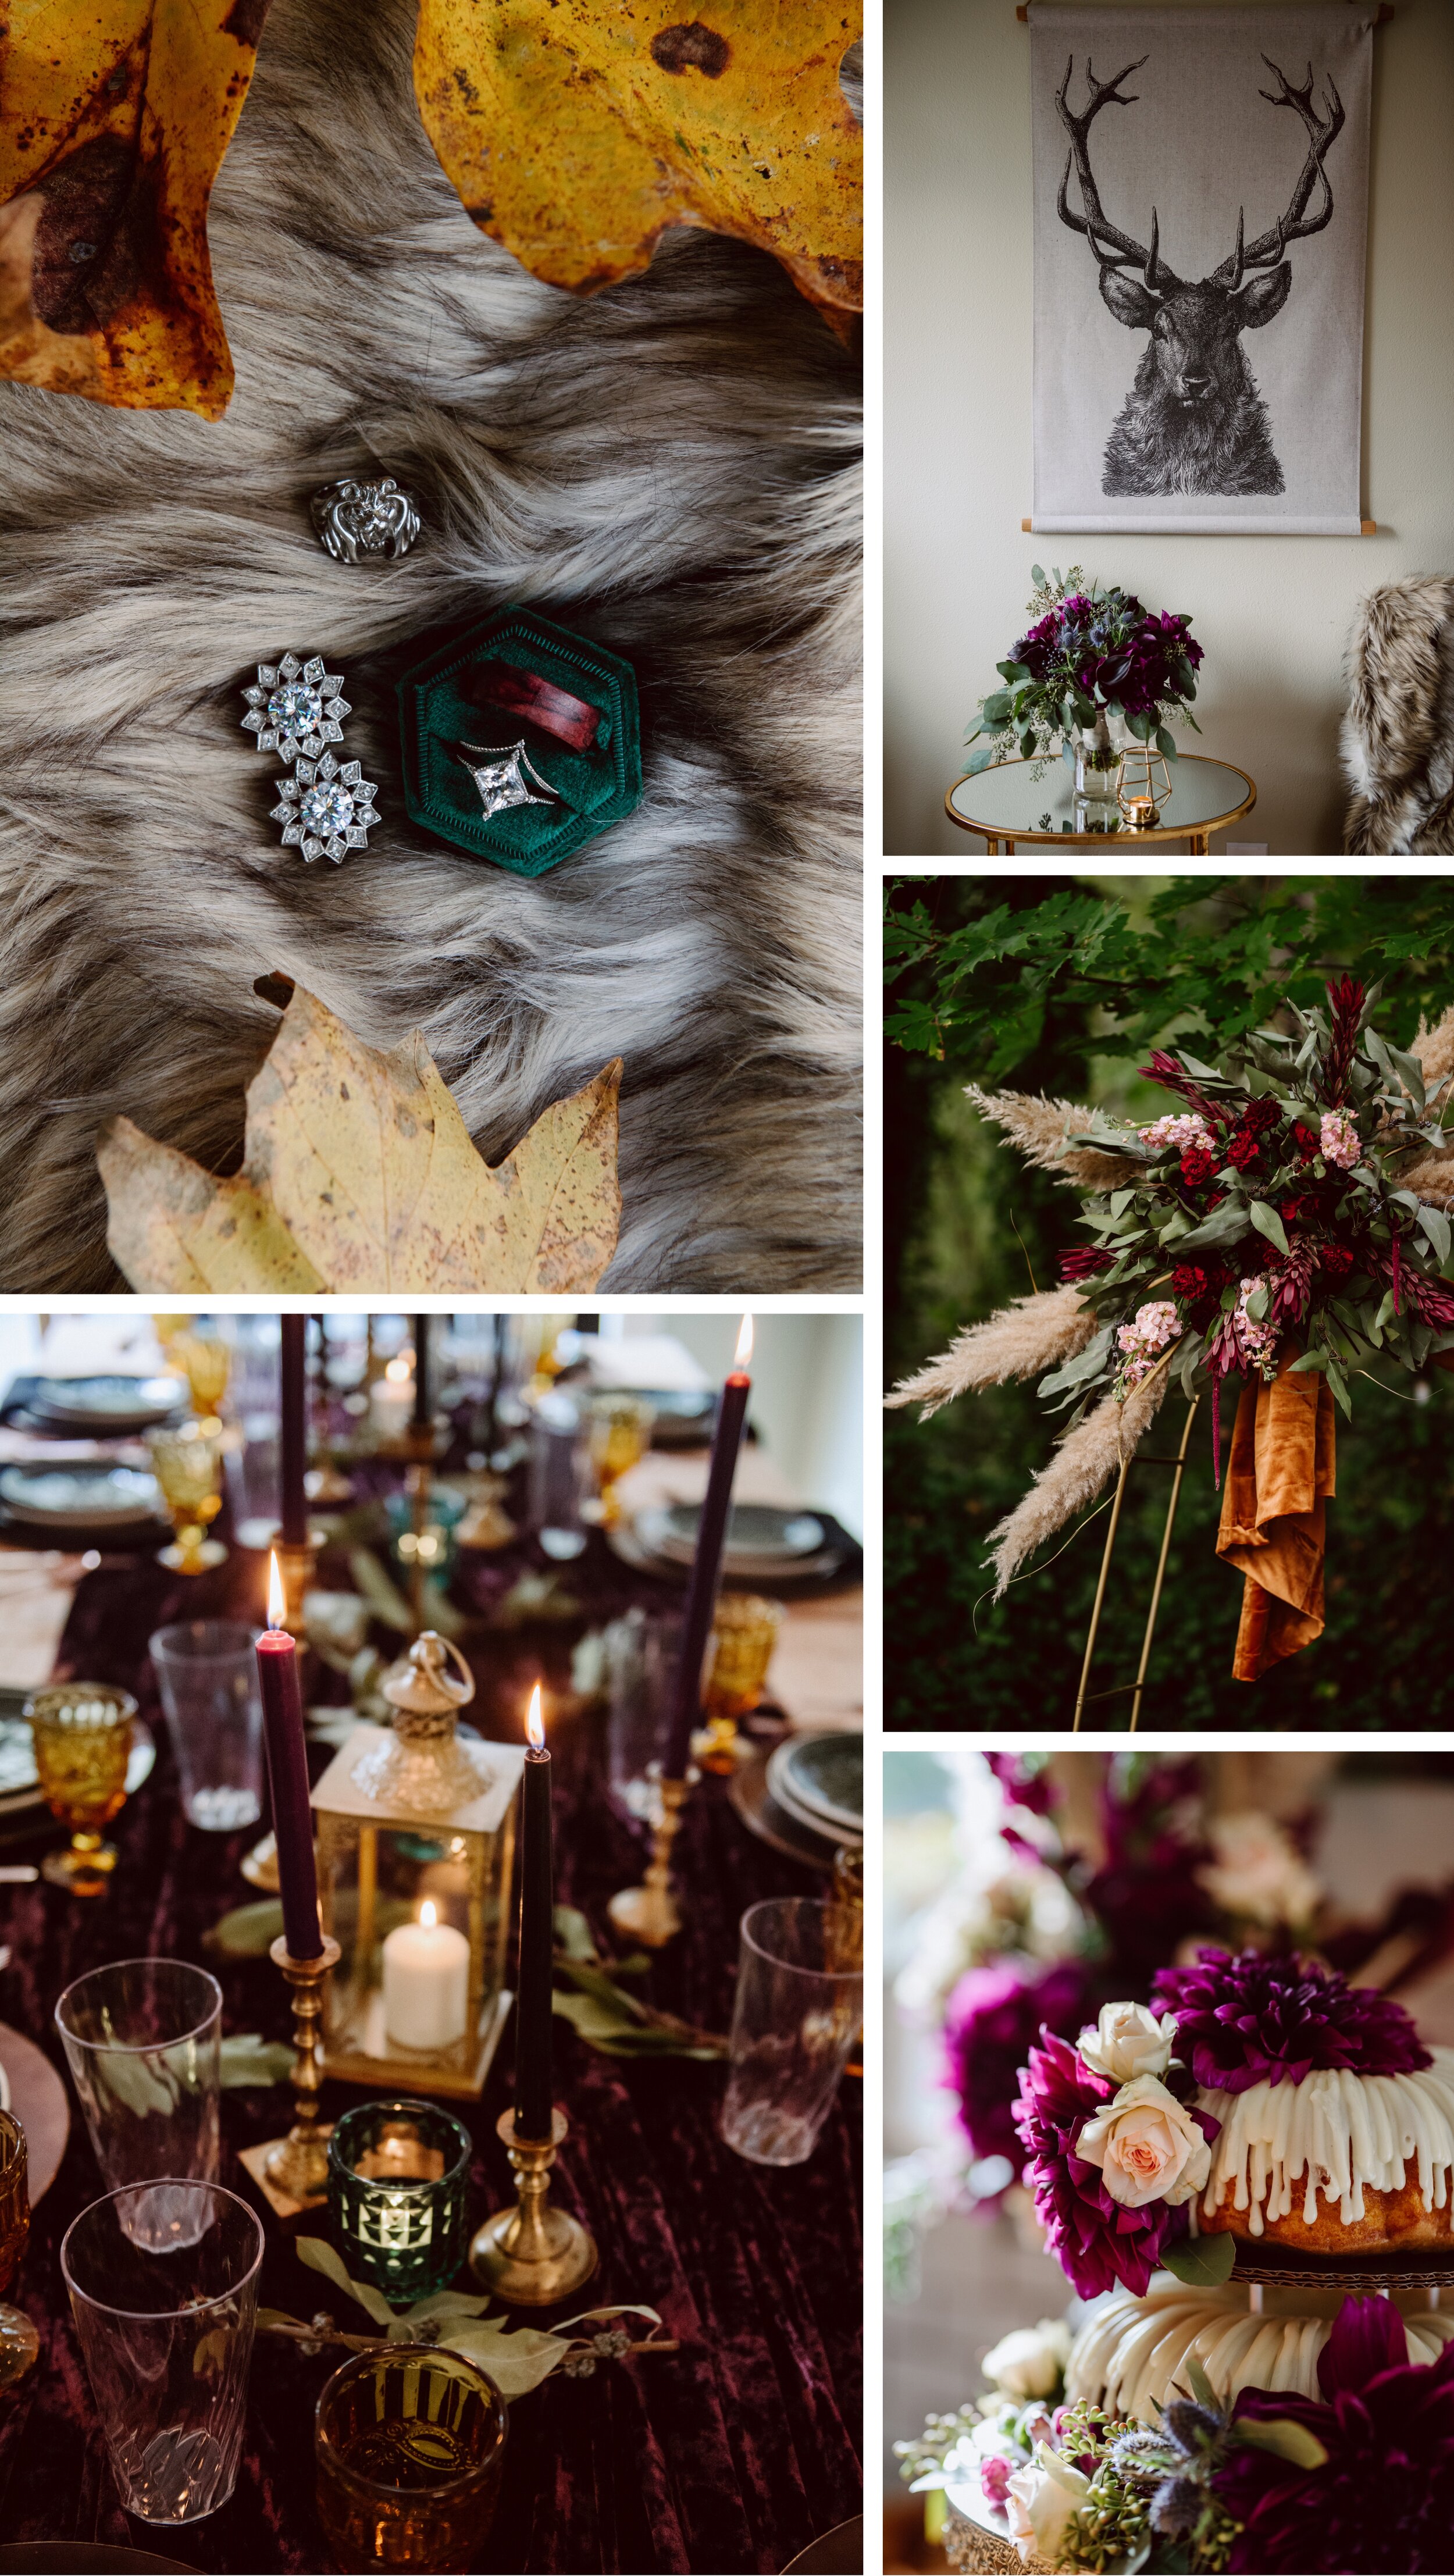 Wedding day details including diamond ring and starburst earrings, candlelit table setting, and florals in jewel tones of red, purple, and green